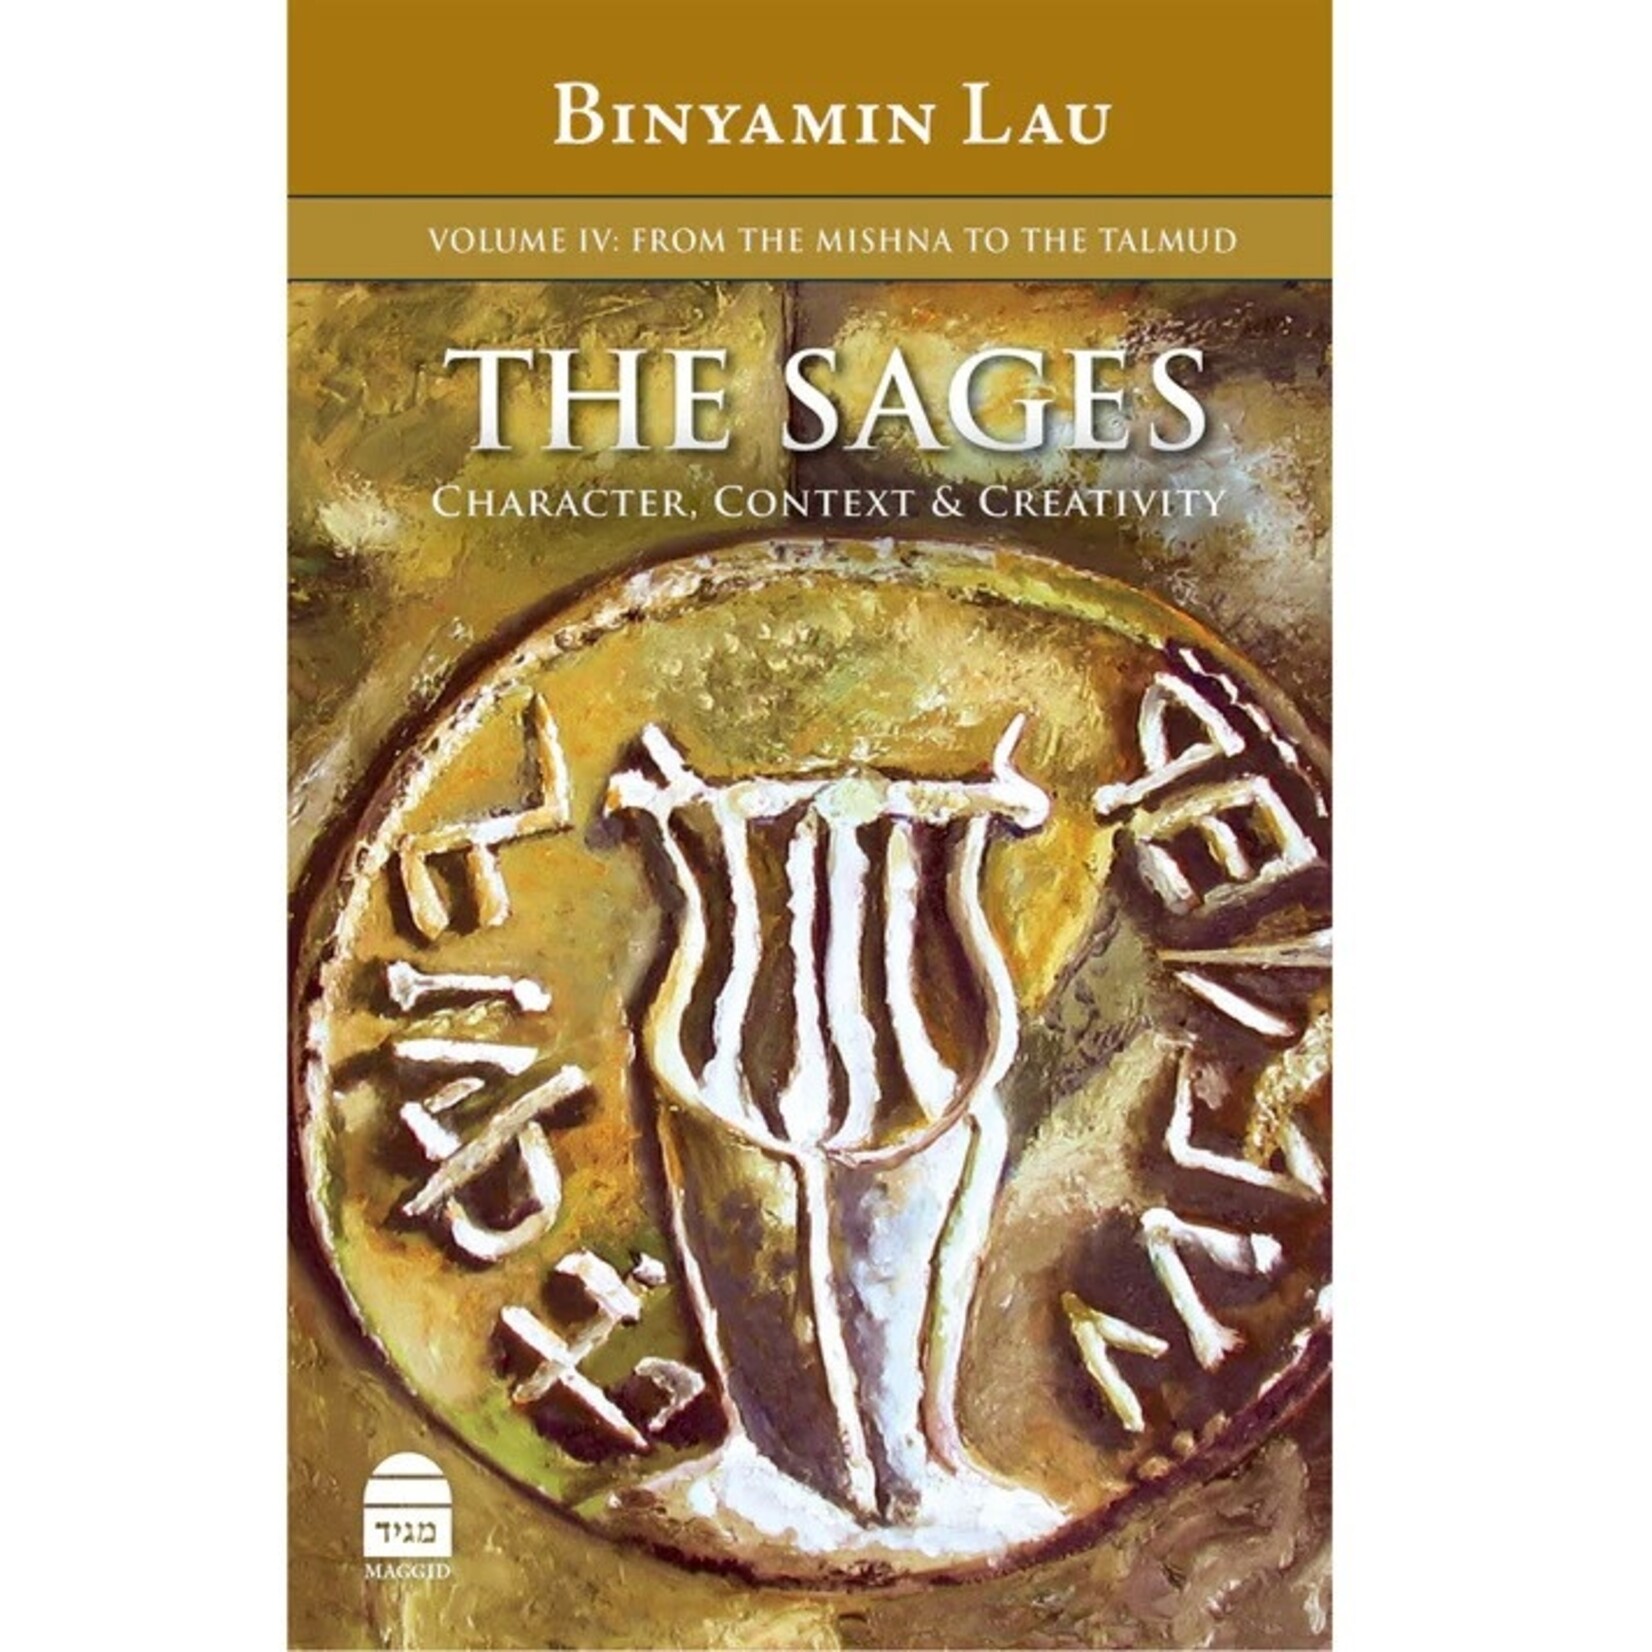 The Sages, Volume 4